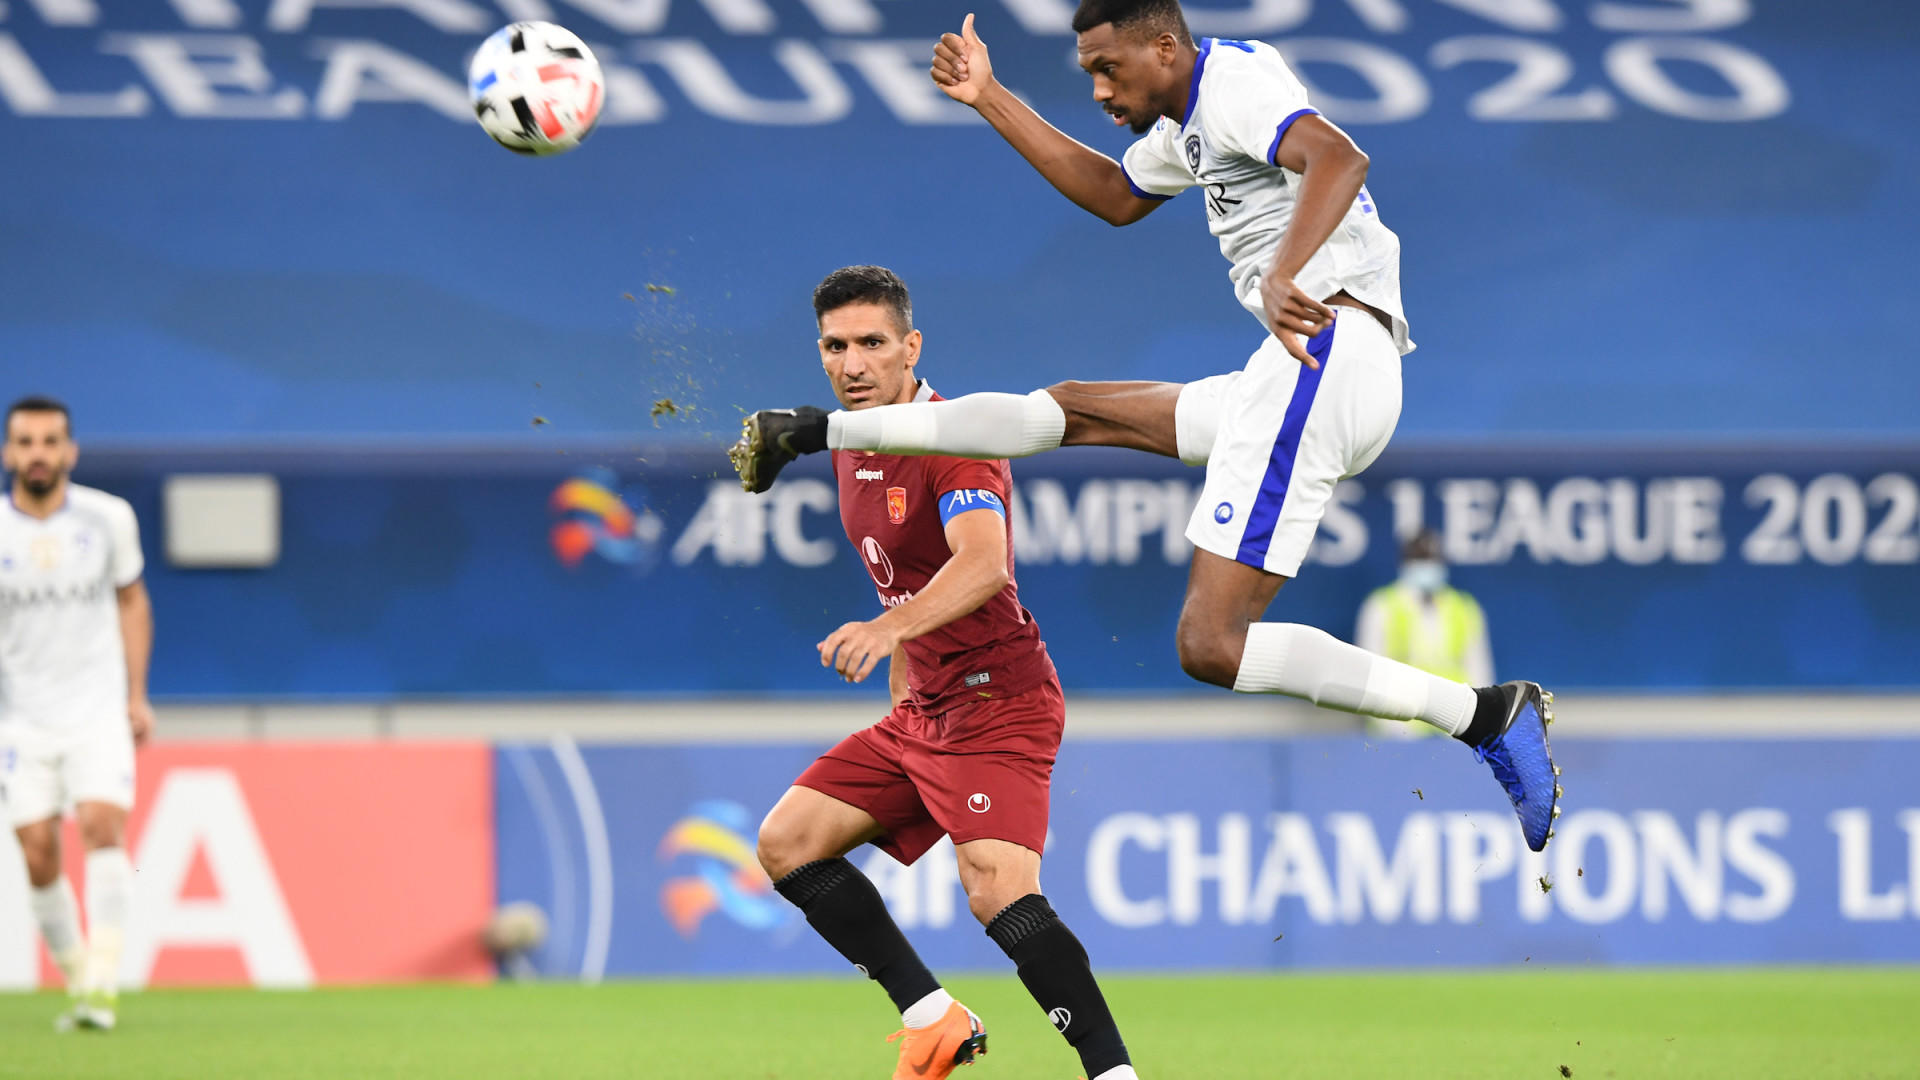 Reigning champions Al Hilal kicked out of AFC Champions League